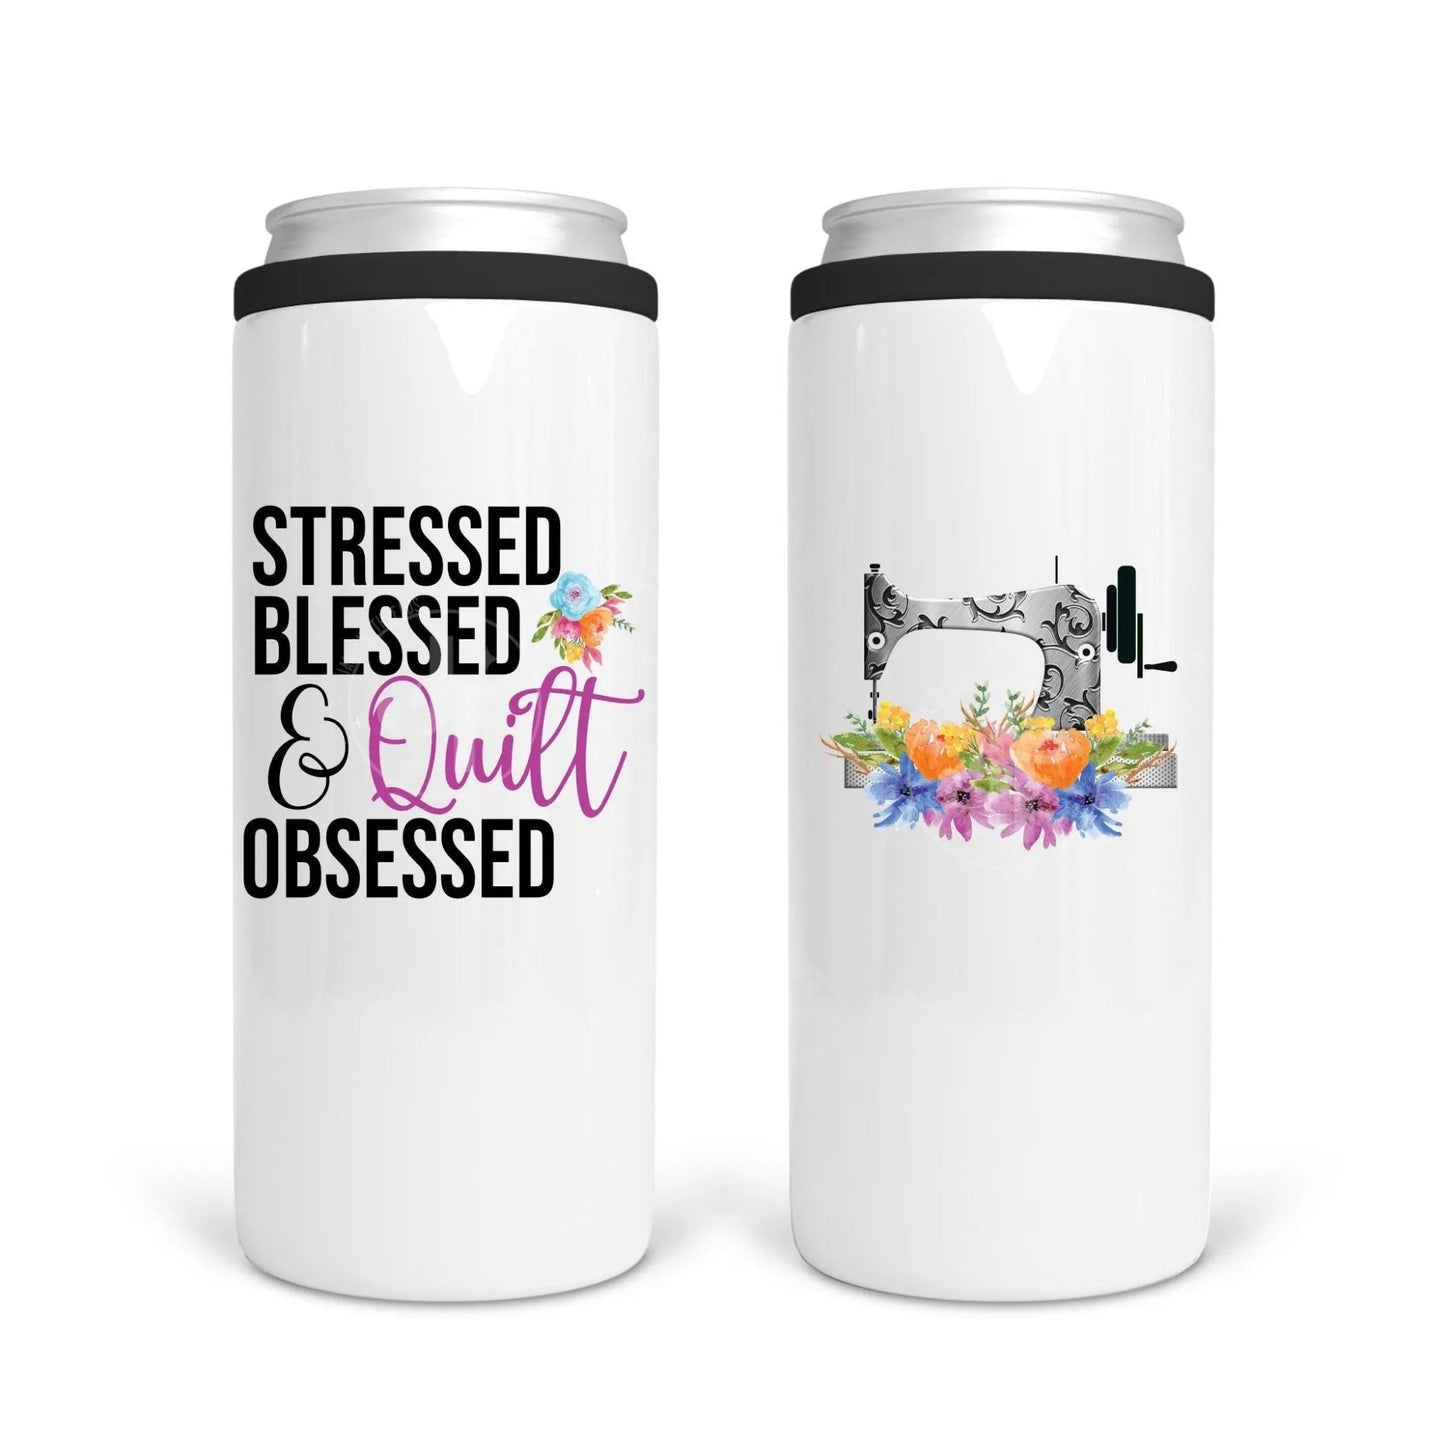 Stressed Blessed and Quilt Obsessed - Jammin Threads